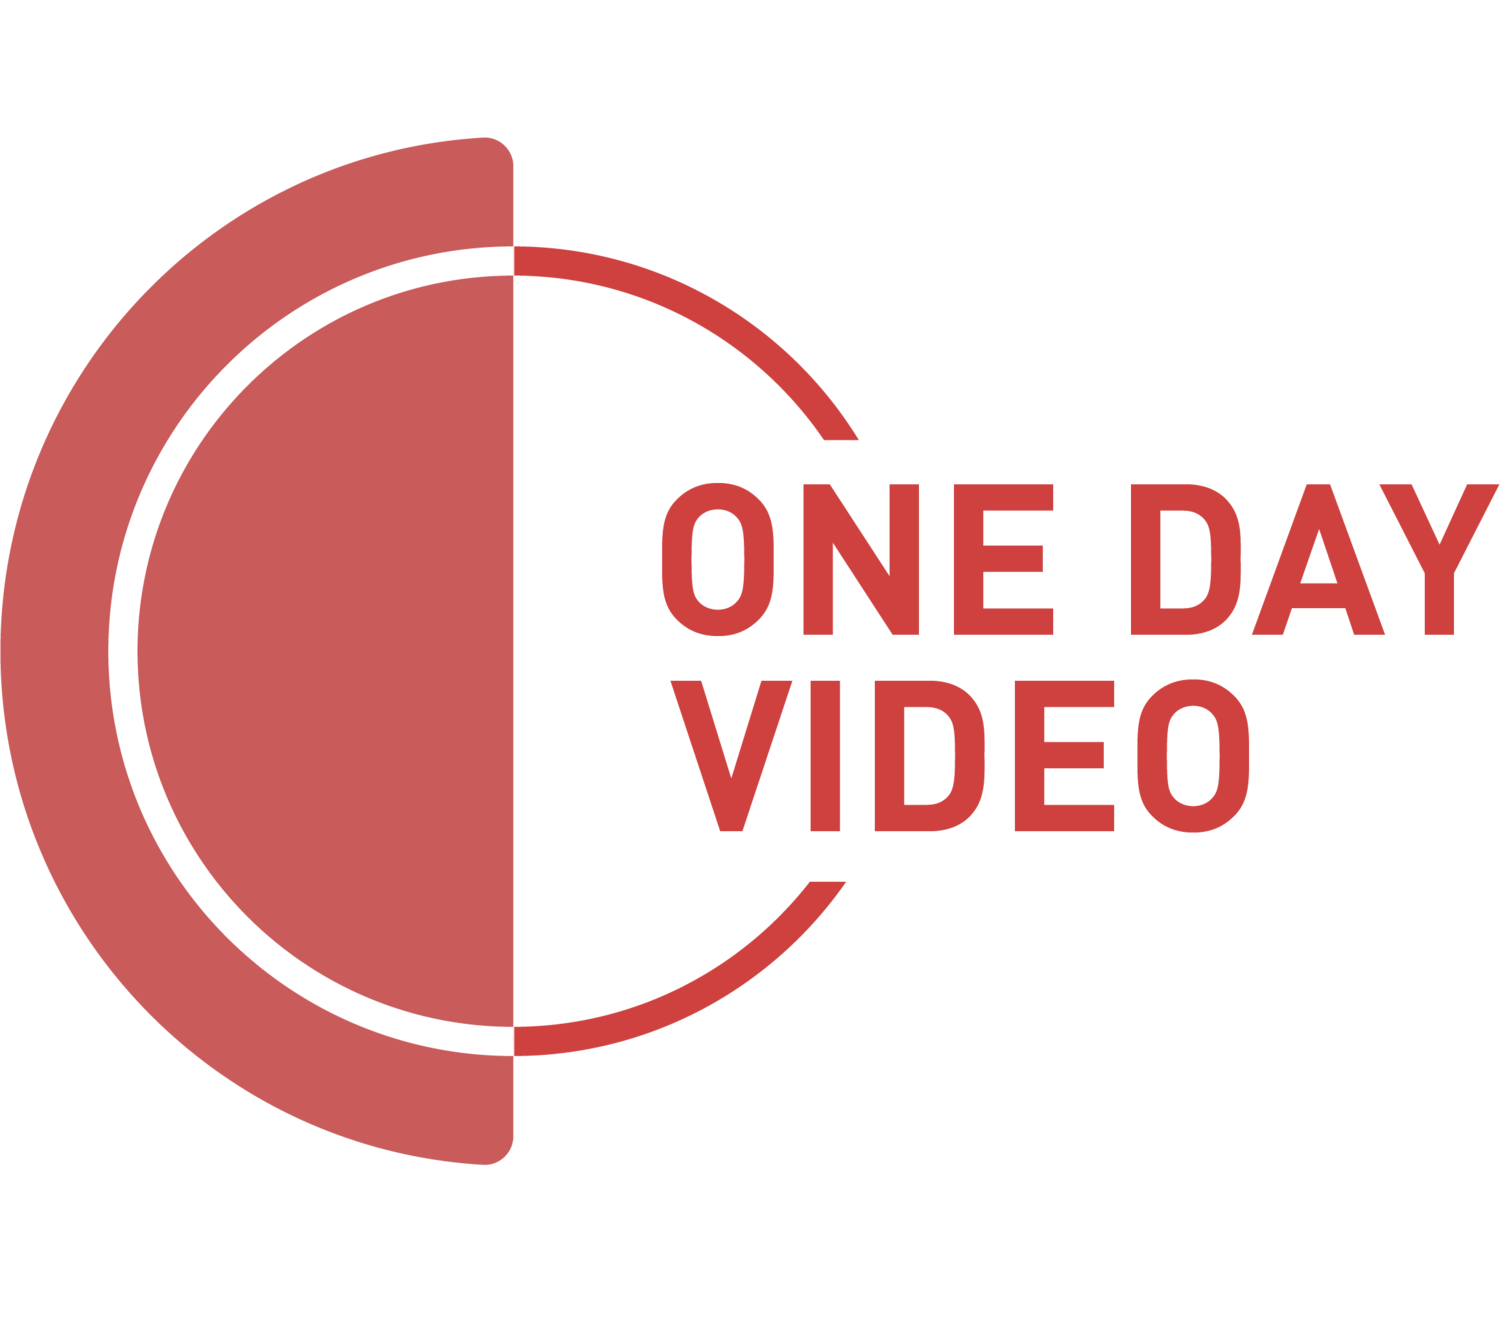 One Day Video